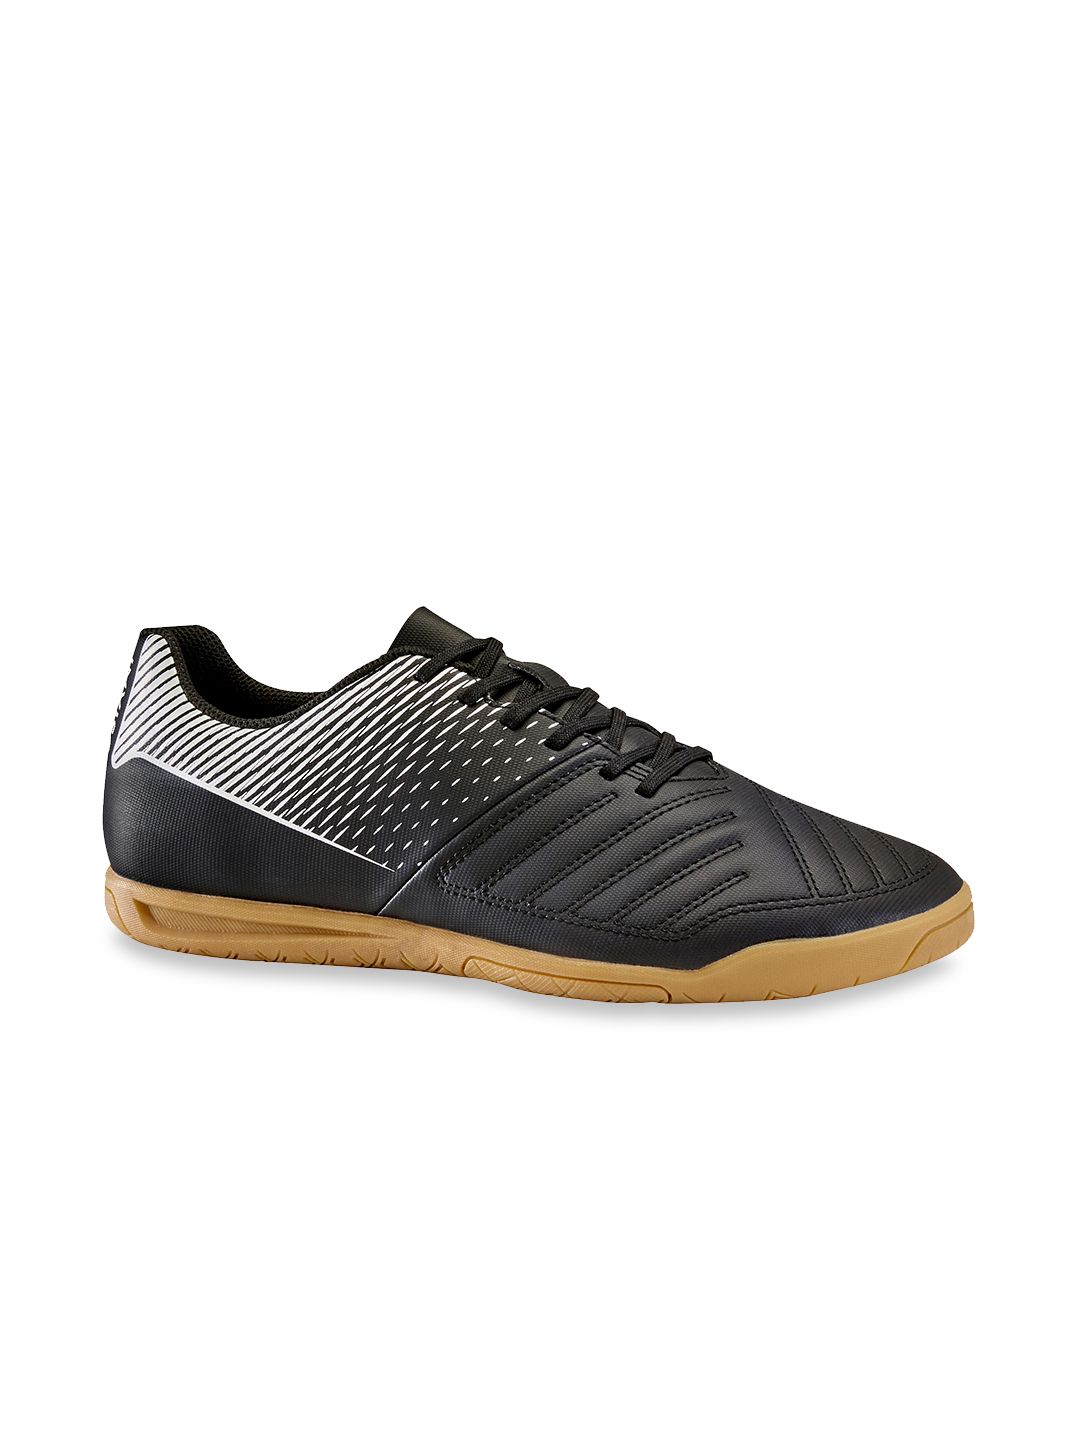 Kipsta By Decathlon Unisex Black Football Shoes Price in India